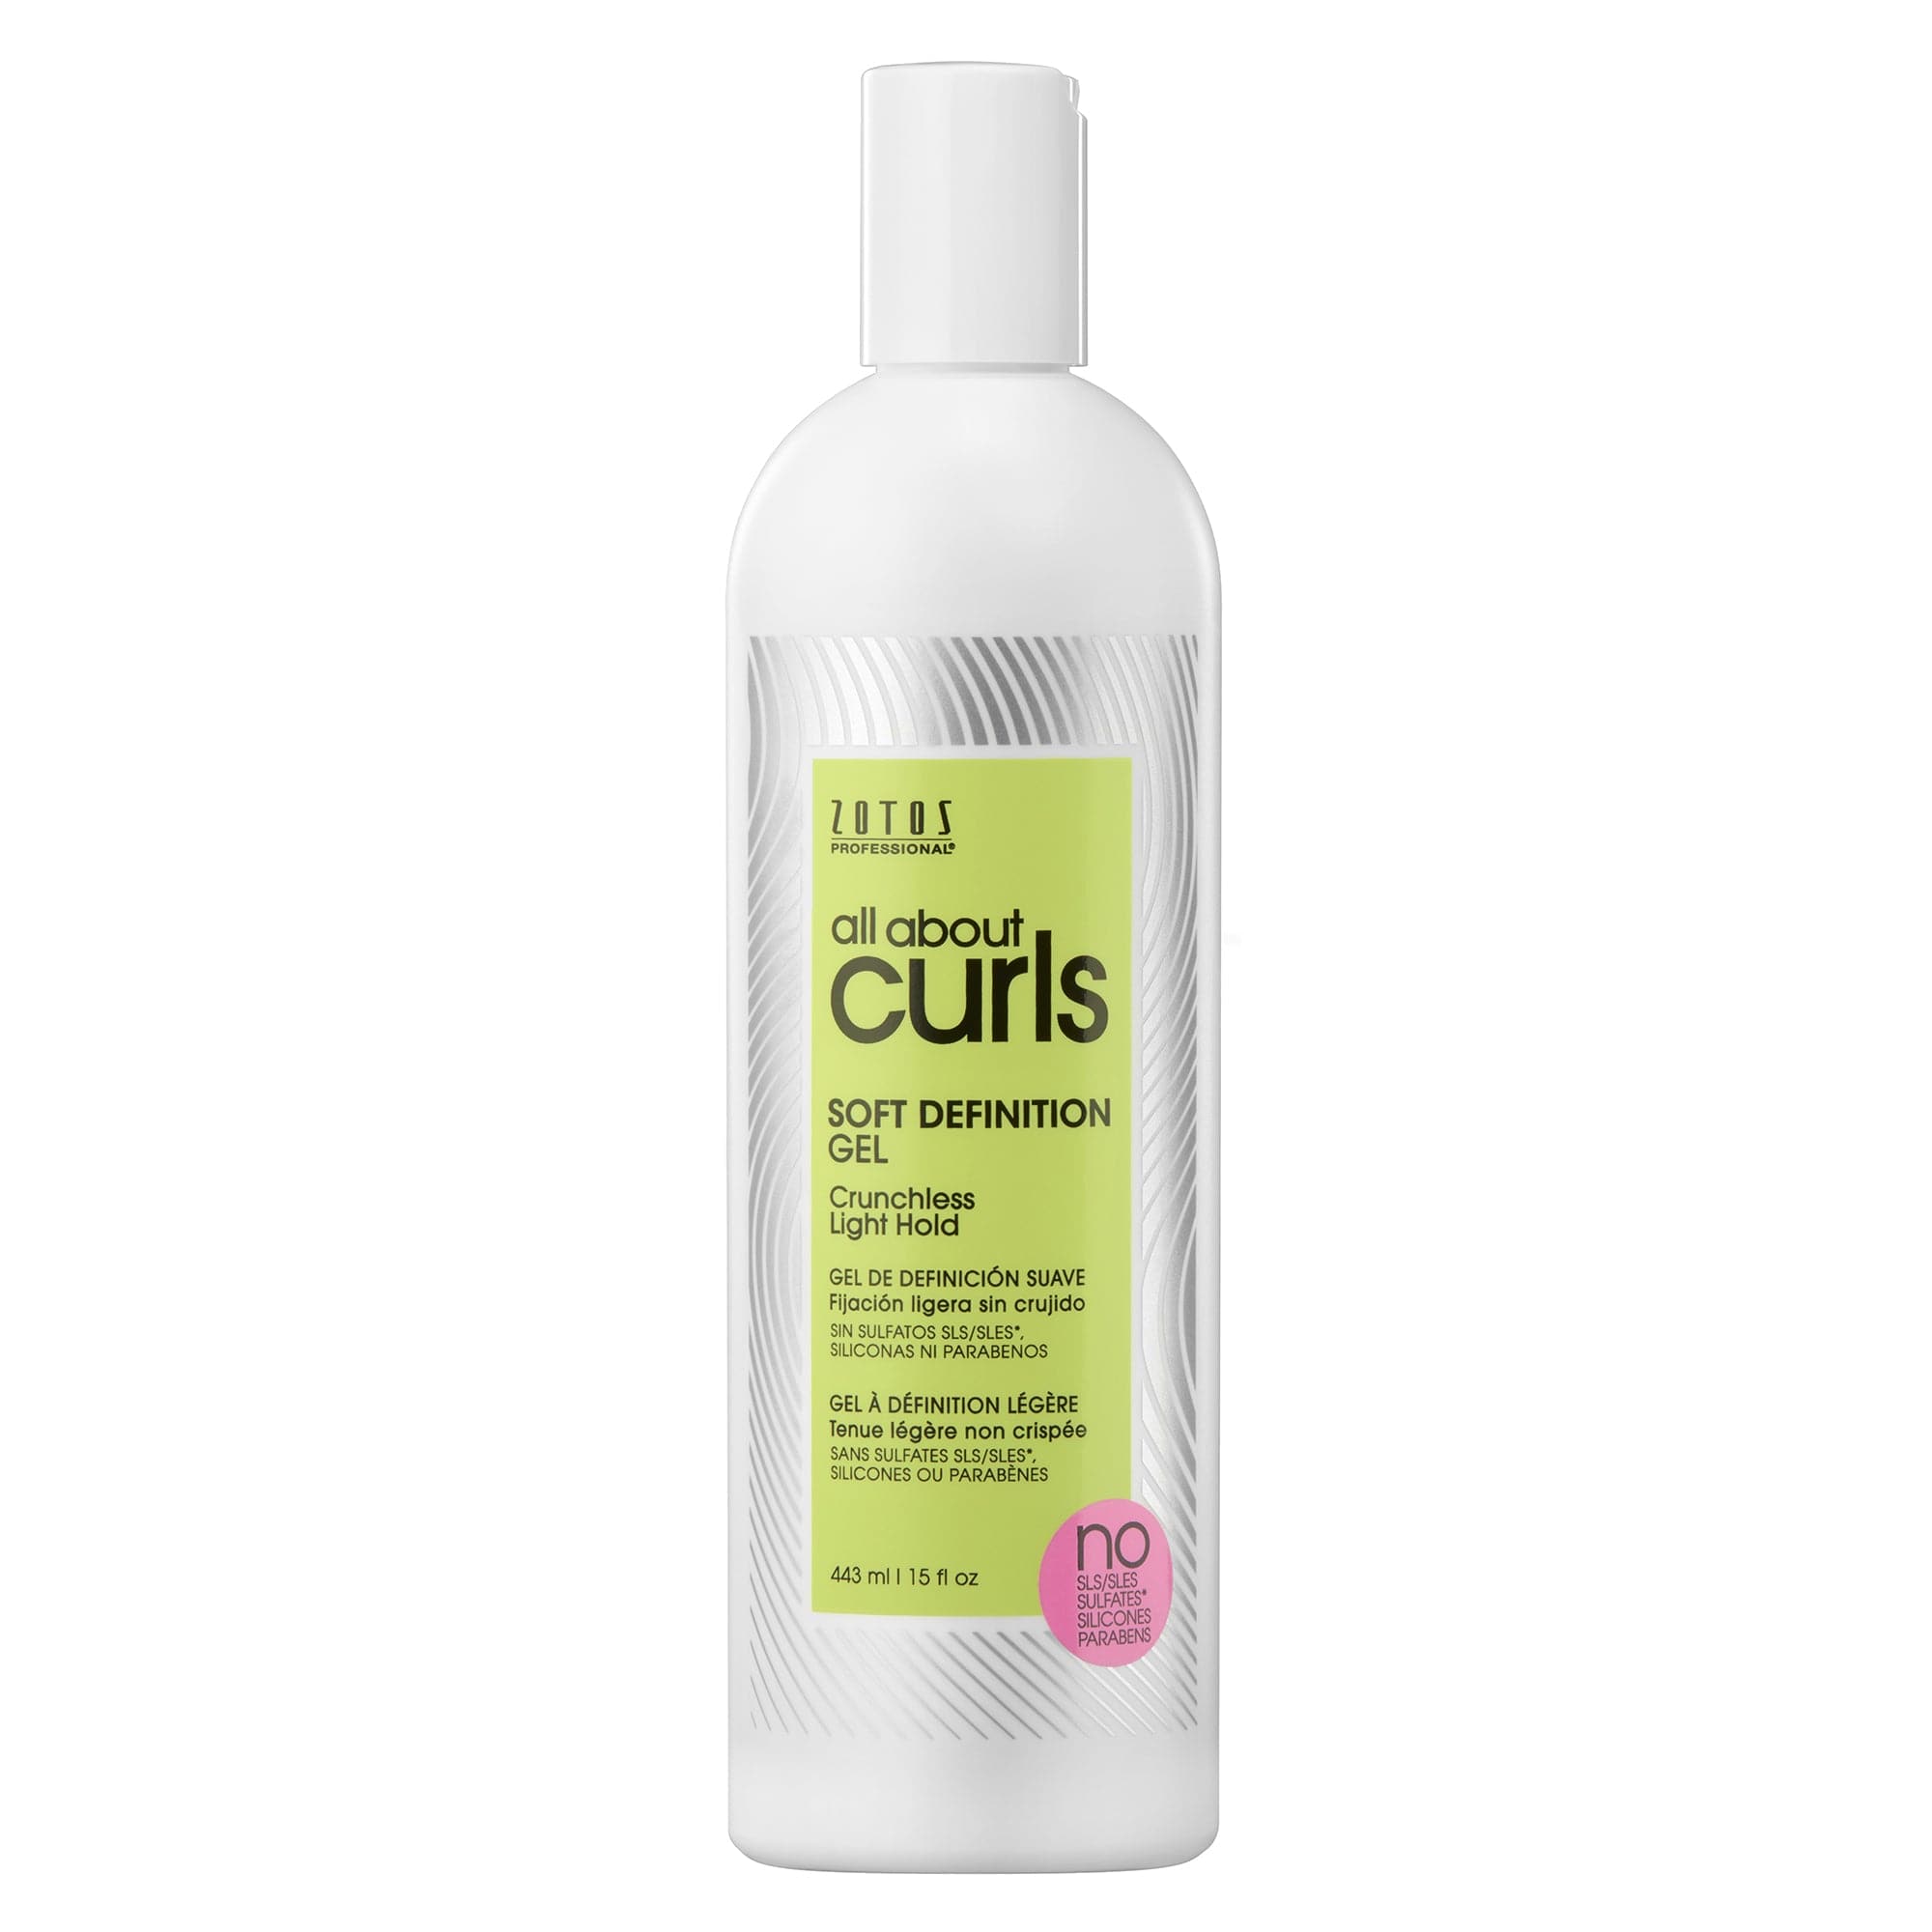 All About Curls™ Soft Definition Gel - Zotos Professional